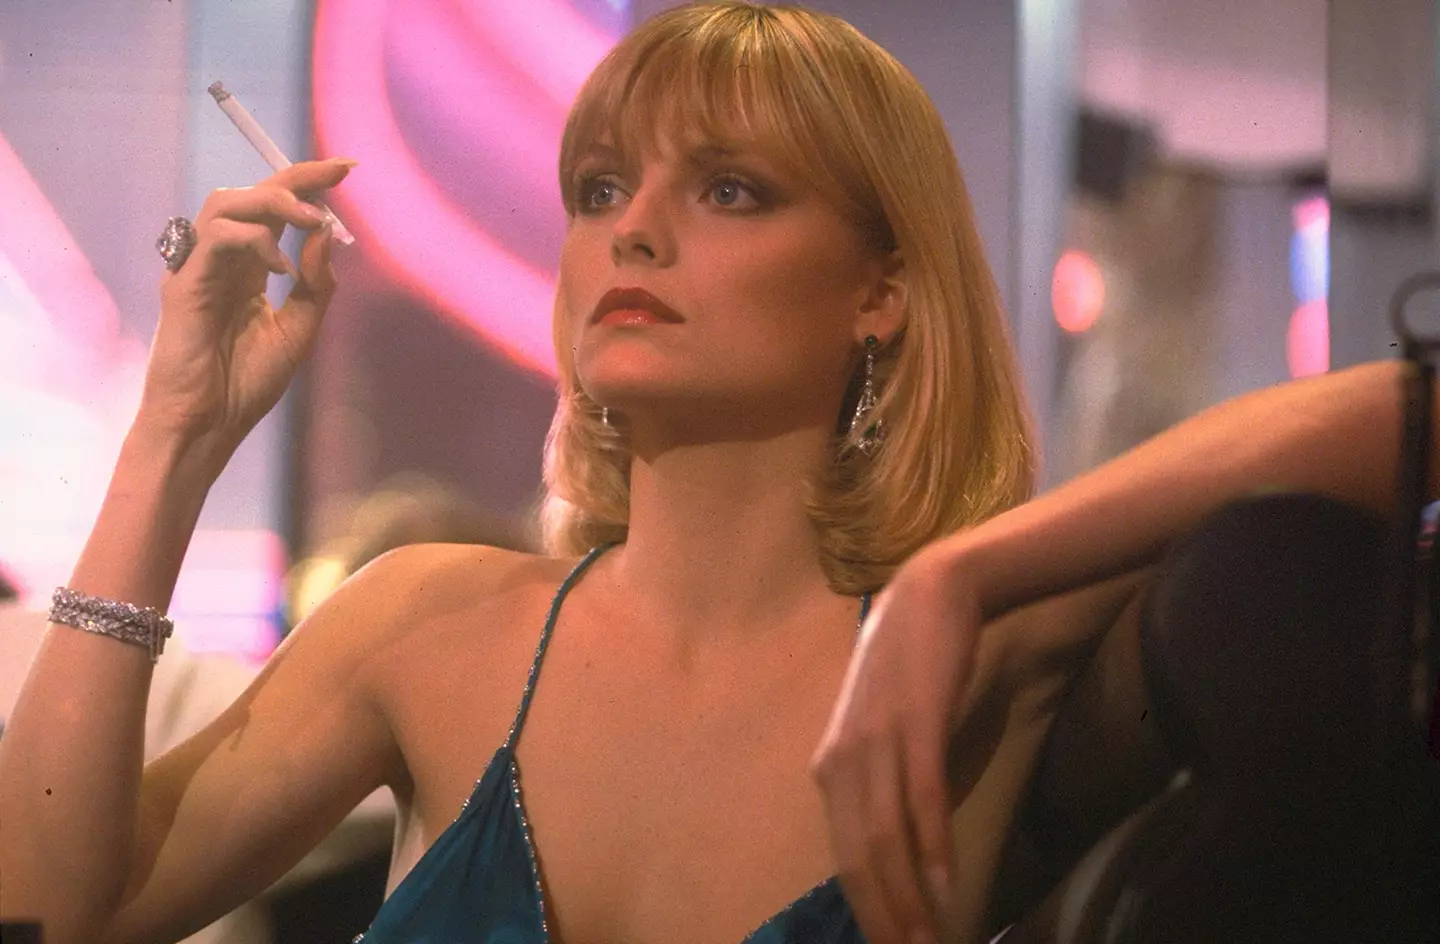 Michelle Pfeiffer 'cried herself to sleep' while filming Scarface because she was 'scared' of working with Al Pacino.